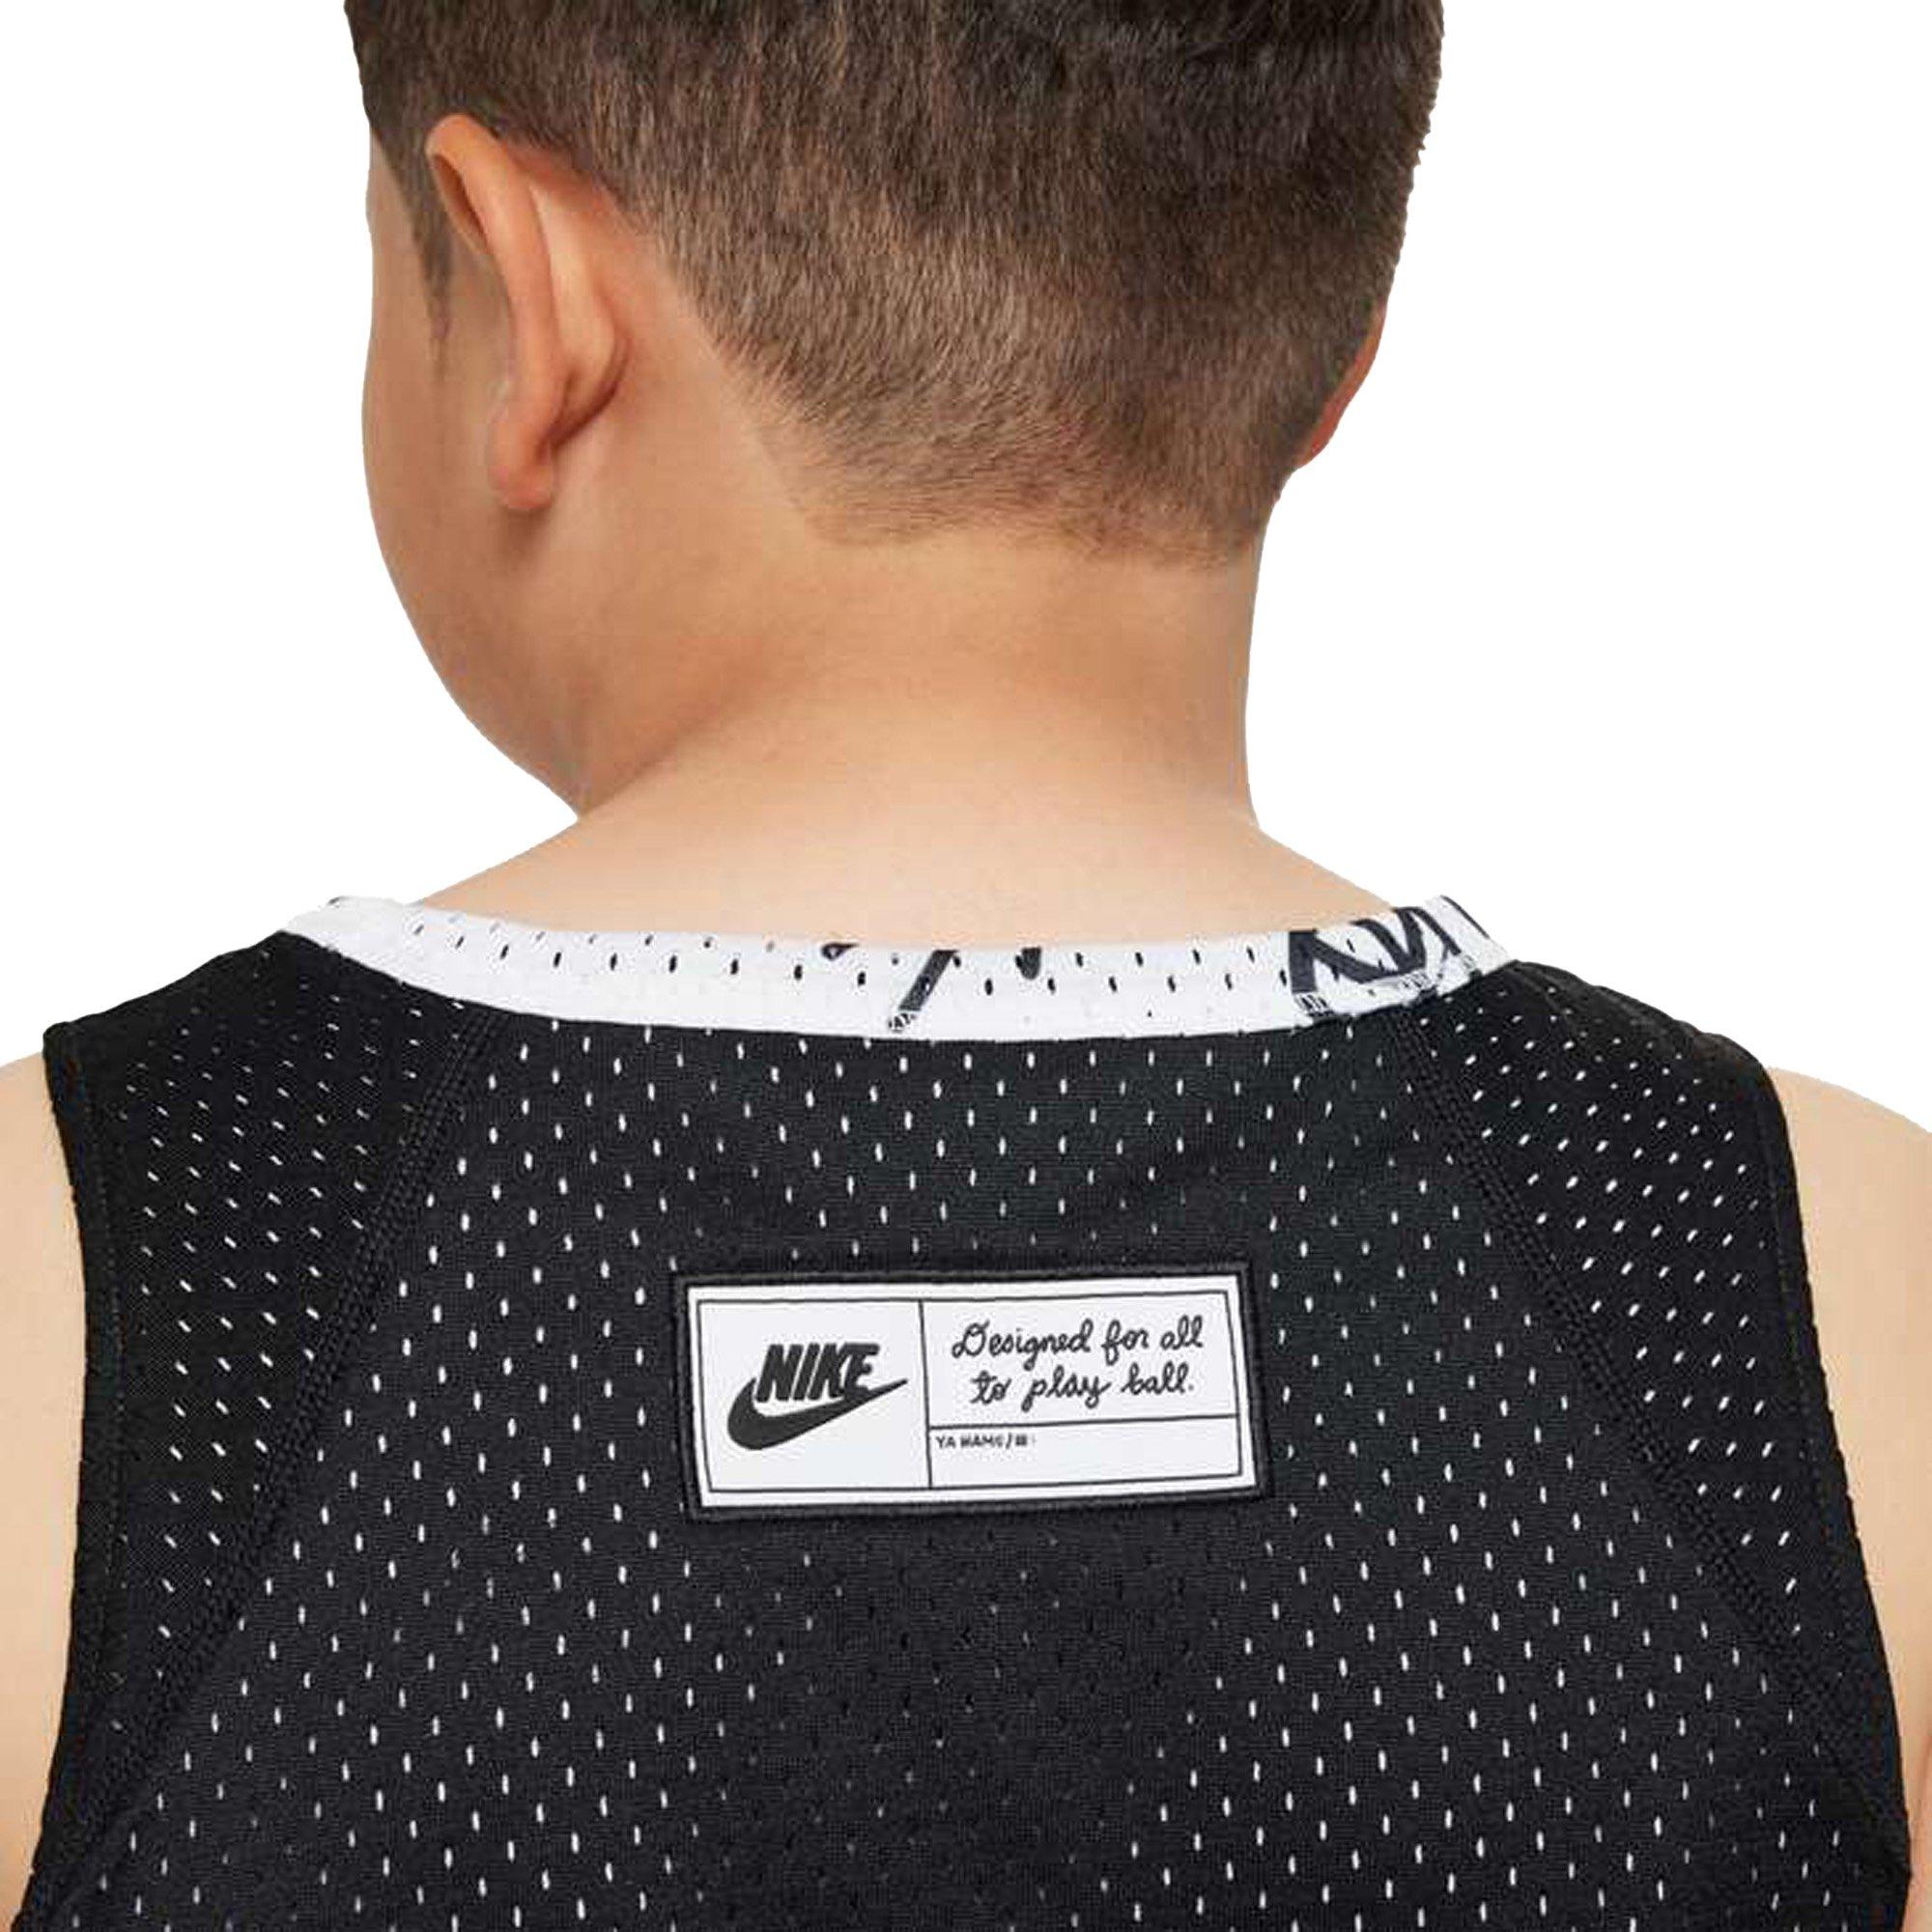 Nike Culture of Basketball Big Kids' (Boys') Reversible Basketball Jersey  (Extended Size).